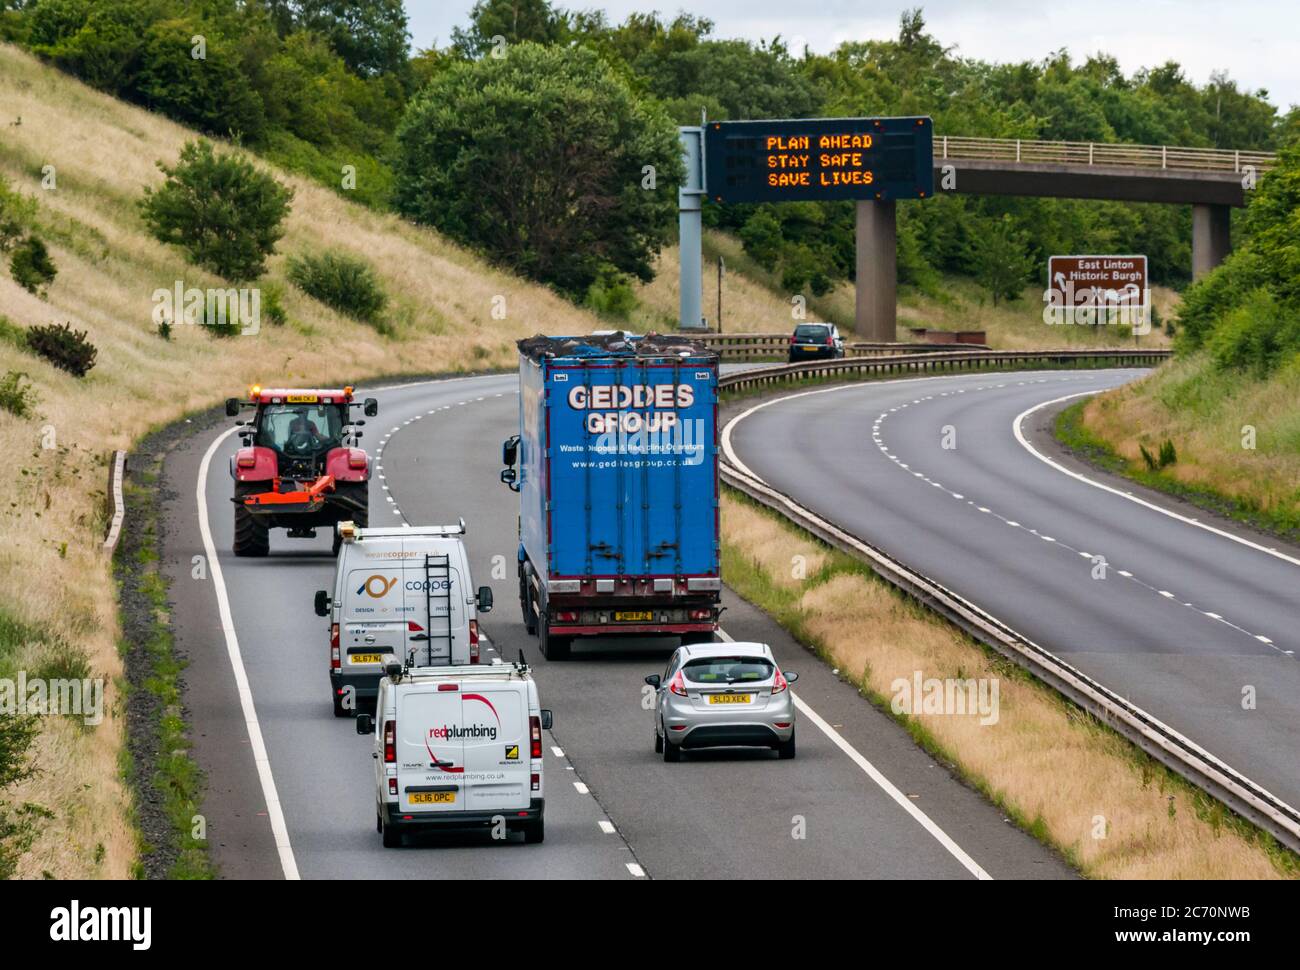 East Lothian, Scotland, United Kingdom, 13th July 2020. A1 Covid-19 travel advice as Scotland enters Phase 3 on an overhead gantry with the new iteration of the message: 'Plan Ahead, Stay Safe, Save Lives'. This is the 4th iteration of the Coronavirus slogans used by the Scottish Government during the pandemic. The dual carriageway is much busier and almost back to normals levels of traffic Stock Photo